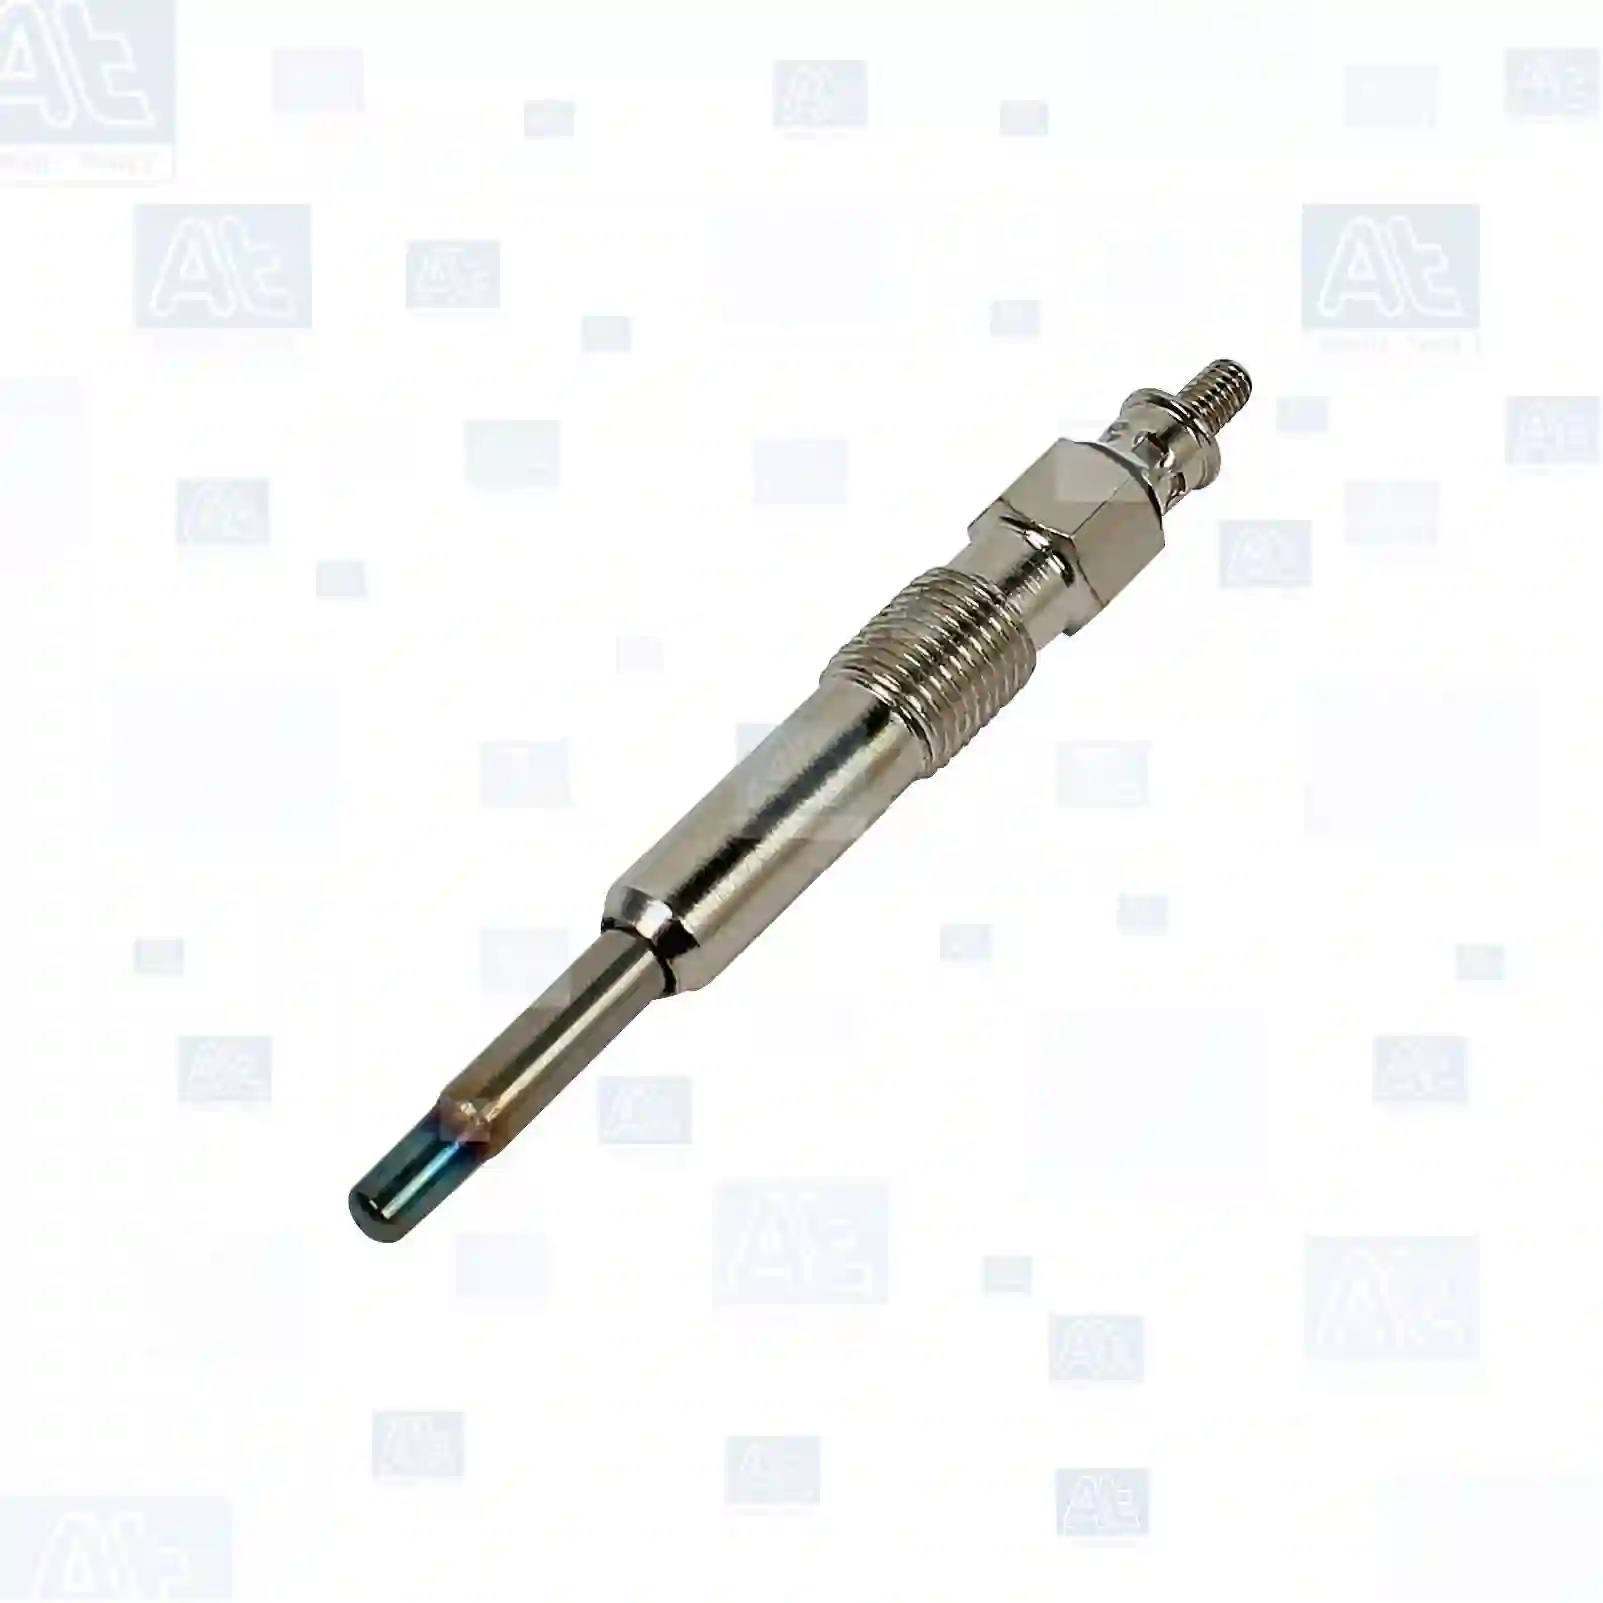 Glow plug, 77700619, 606517002, 60617002, 71735465, N10579201, N10579202, 46072003F, 4863826, 4863826AA, 7700100558, 8671012306, 4863826, 606517002, 60617002, 61617002, 71735465, 1207068, 1207069, 1517247, 1690048, 95DD6M090AA, EZD36, V95DD6M090AA, 1214053, 1214427, 32017512, 88900716, 9110945, 91153919, 93186027, 93192629, 4863826, 4863826AA, 60617002, 61617002, 1214053, 1214427, 4402945, 4418163, 6001545515, 7700100558, 8200423224, 8200423227, 8671012306, NCC100080, NCC100080L, N10579201, N10579202, N10579201, N10579202, N10579201, N10579202 ||  77700619 At Spare Part | Engine, Accelerator Pedal, Camshaft, Connecting Rod, Crankcase, Crankshaft, Cylinder Head, Engine Suspension Mountings, Exhaust Manifold, Exhaust Gas Recirculation, Filter Kits, Flywheel Housing, General Overhaul Kits, Engine, Intake Manifold, Oil Cleaner, Oil Cooler, Oil Filter, Oil Pump, Oil Sump, Piston & Liner, Sensor & Switch, Timing Case, Turbocharger, Cooling System, Belt Tensioner, Coolant Filter, Coolant Pipe, Corrosion Prevention Agent, Drive, Expansion Tank, Fan, Intercooler, Monitors & Gauges, Radiator, Thermostat, V-Belt / Timing belt, Water Pump, Fuel System, Electronical Injector Unit, Feed Pump, Fuel Filter, cpl., Fuel Gauge Sender,  Fuel Line, Fuel Pump, Fuel Tank, Injection Line Kit, Injection Pump, Exhaust System, Clutch & Pedal, Gearbox, Propeller Shaft, Axles, Brake System, Hubs & Wheels, Suspension, Leaf Spring, Universal Parts / Accessories, Steering, Electrical System, Cabin Glow plug, 77700619, 606517002, 60617002, 71735465, N10579201, N10579202, 46072003F, 4863826, 4863826AA, 7700100558, 8671012306, 4863826, 606517002, 60617002, 61617002, 71735465, 1207068, 1207069, 1517247, 1690048, 95DD6M090AA, EZD36, V95DD6M090AA, 1214053, 1214427, 32017512, 88900716, 9110945, 91153919, 93186027, 93192629, 4863826, 4863826AA, 60617002, 61617002, 1214053, 1214427, 4402945, 4418163, 6001545515, 7700100558, 8200423224, 8200423227, 8671012306, NCC100080, NCC100080L, N10579201, N10579202, N10579201, N10579202, N10579201, N10579202 ||  77700619 At Spare Part | Engine, Accelerator Pedal, Camshaft, Connecting Rod, Crankcase, Crankshaft, Cylinder Head, Engine Suspension Mountings, Exhaust Manifold, Exhaust Gas Recirculation, Filter Kits, Flywheel Housing, General Overhaul Kits, Engine, Intake Manifold, Oil Cleaner, Oil Cooler, Oil Filter, Oil Pump, Oil Sump, Piston & Liner, Sensor & Switch, Timing Case, Turbocharger, Cooling System, Belt Tensioner, Coolant Filter, Coolant Pipe, Corrosion Prevention Agent, Drive, Expansion Tank, Fan, Intercooler, Monitors & Gauges, Radiator, Thermostat, V-Belt / Timing belt, Water Pump, Fuel System, Electronical Injector Unit, Feed Pump, Fuel Filter, cpl., Fuel Gauge Sender,  Fuel Line, Fuel Pump, Fuel Tank, Injection Line Kit, Injection Pump, Exhaust System, Clutch & Pedal, Gearbox, Propeller Shaft, Axles, Brake System, Hubs & Wheels, Suspension, Leaf Spring, Universal Parts / Accessories, Steering, Electrical System, Cabin